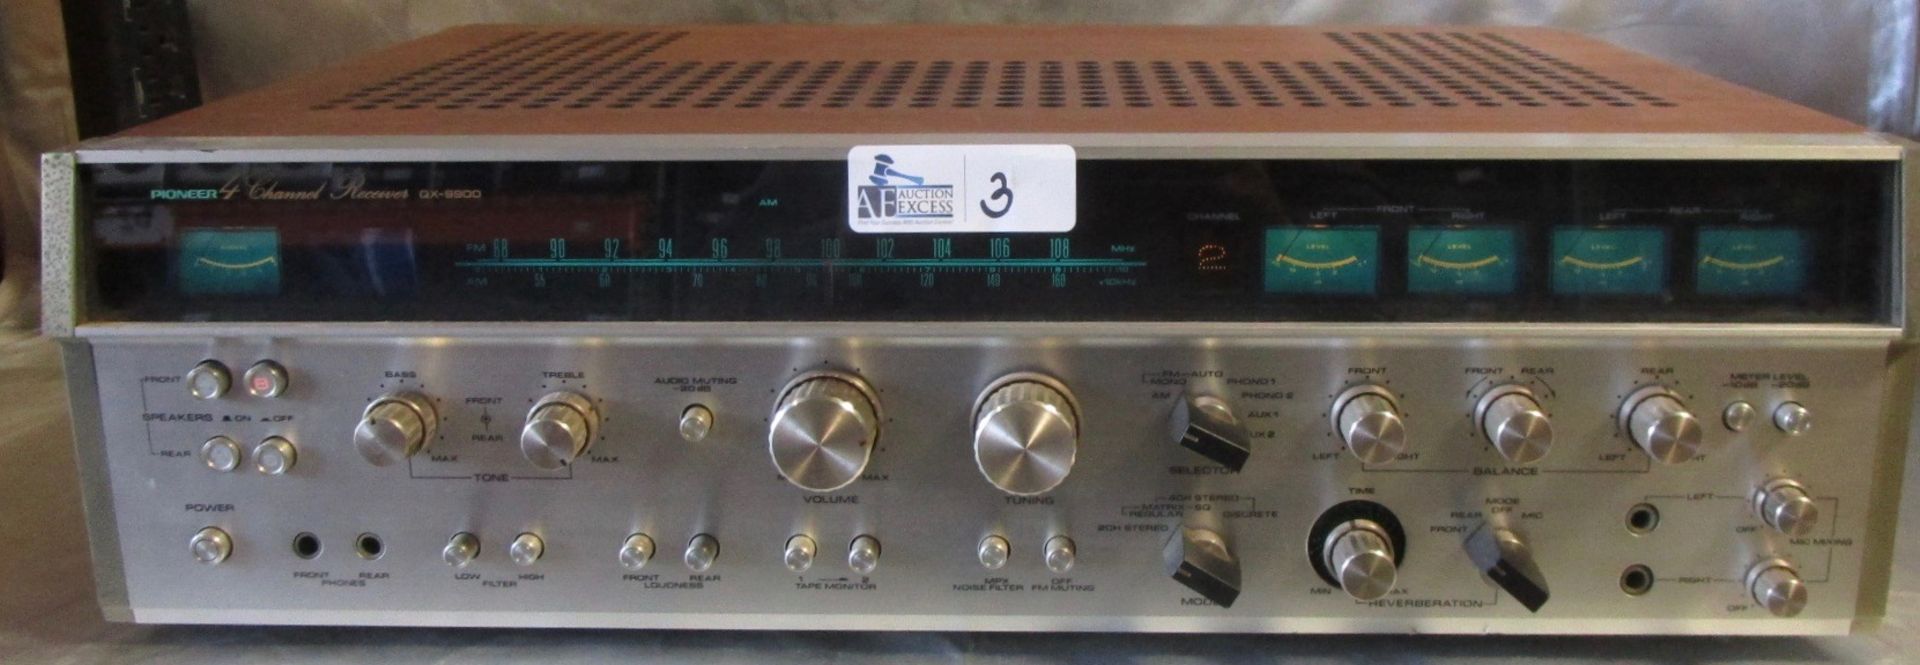 PIONEER 4 CHANNEL RECEIVER QX-9900